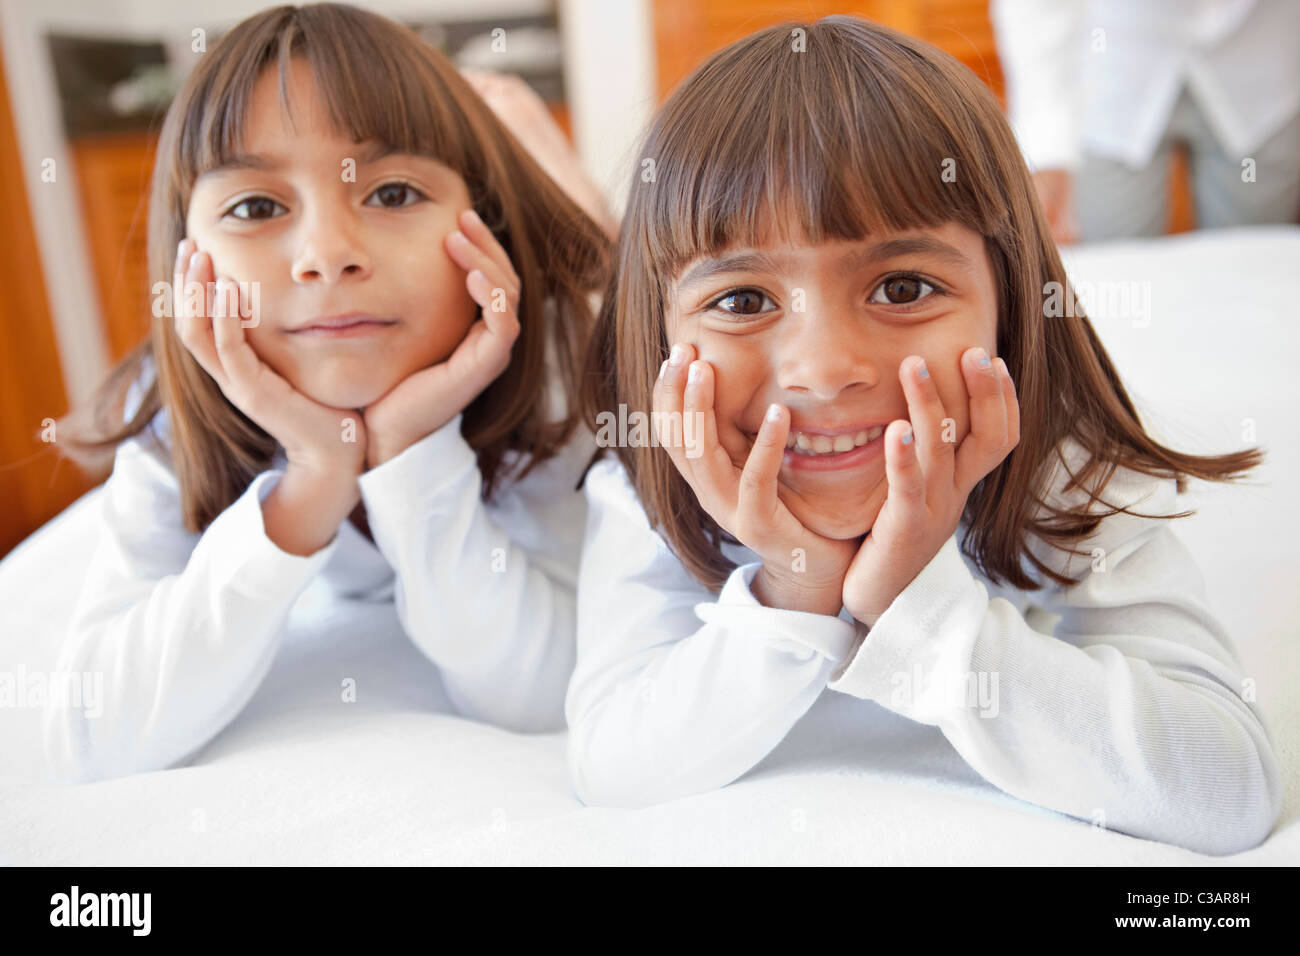 portrait of two smiling young girls Stock Photo